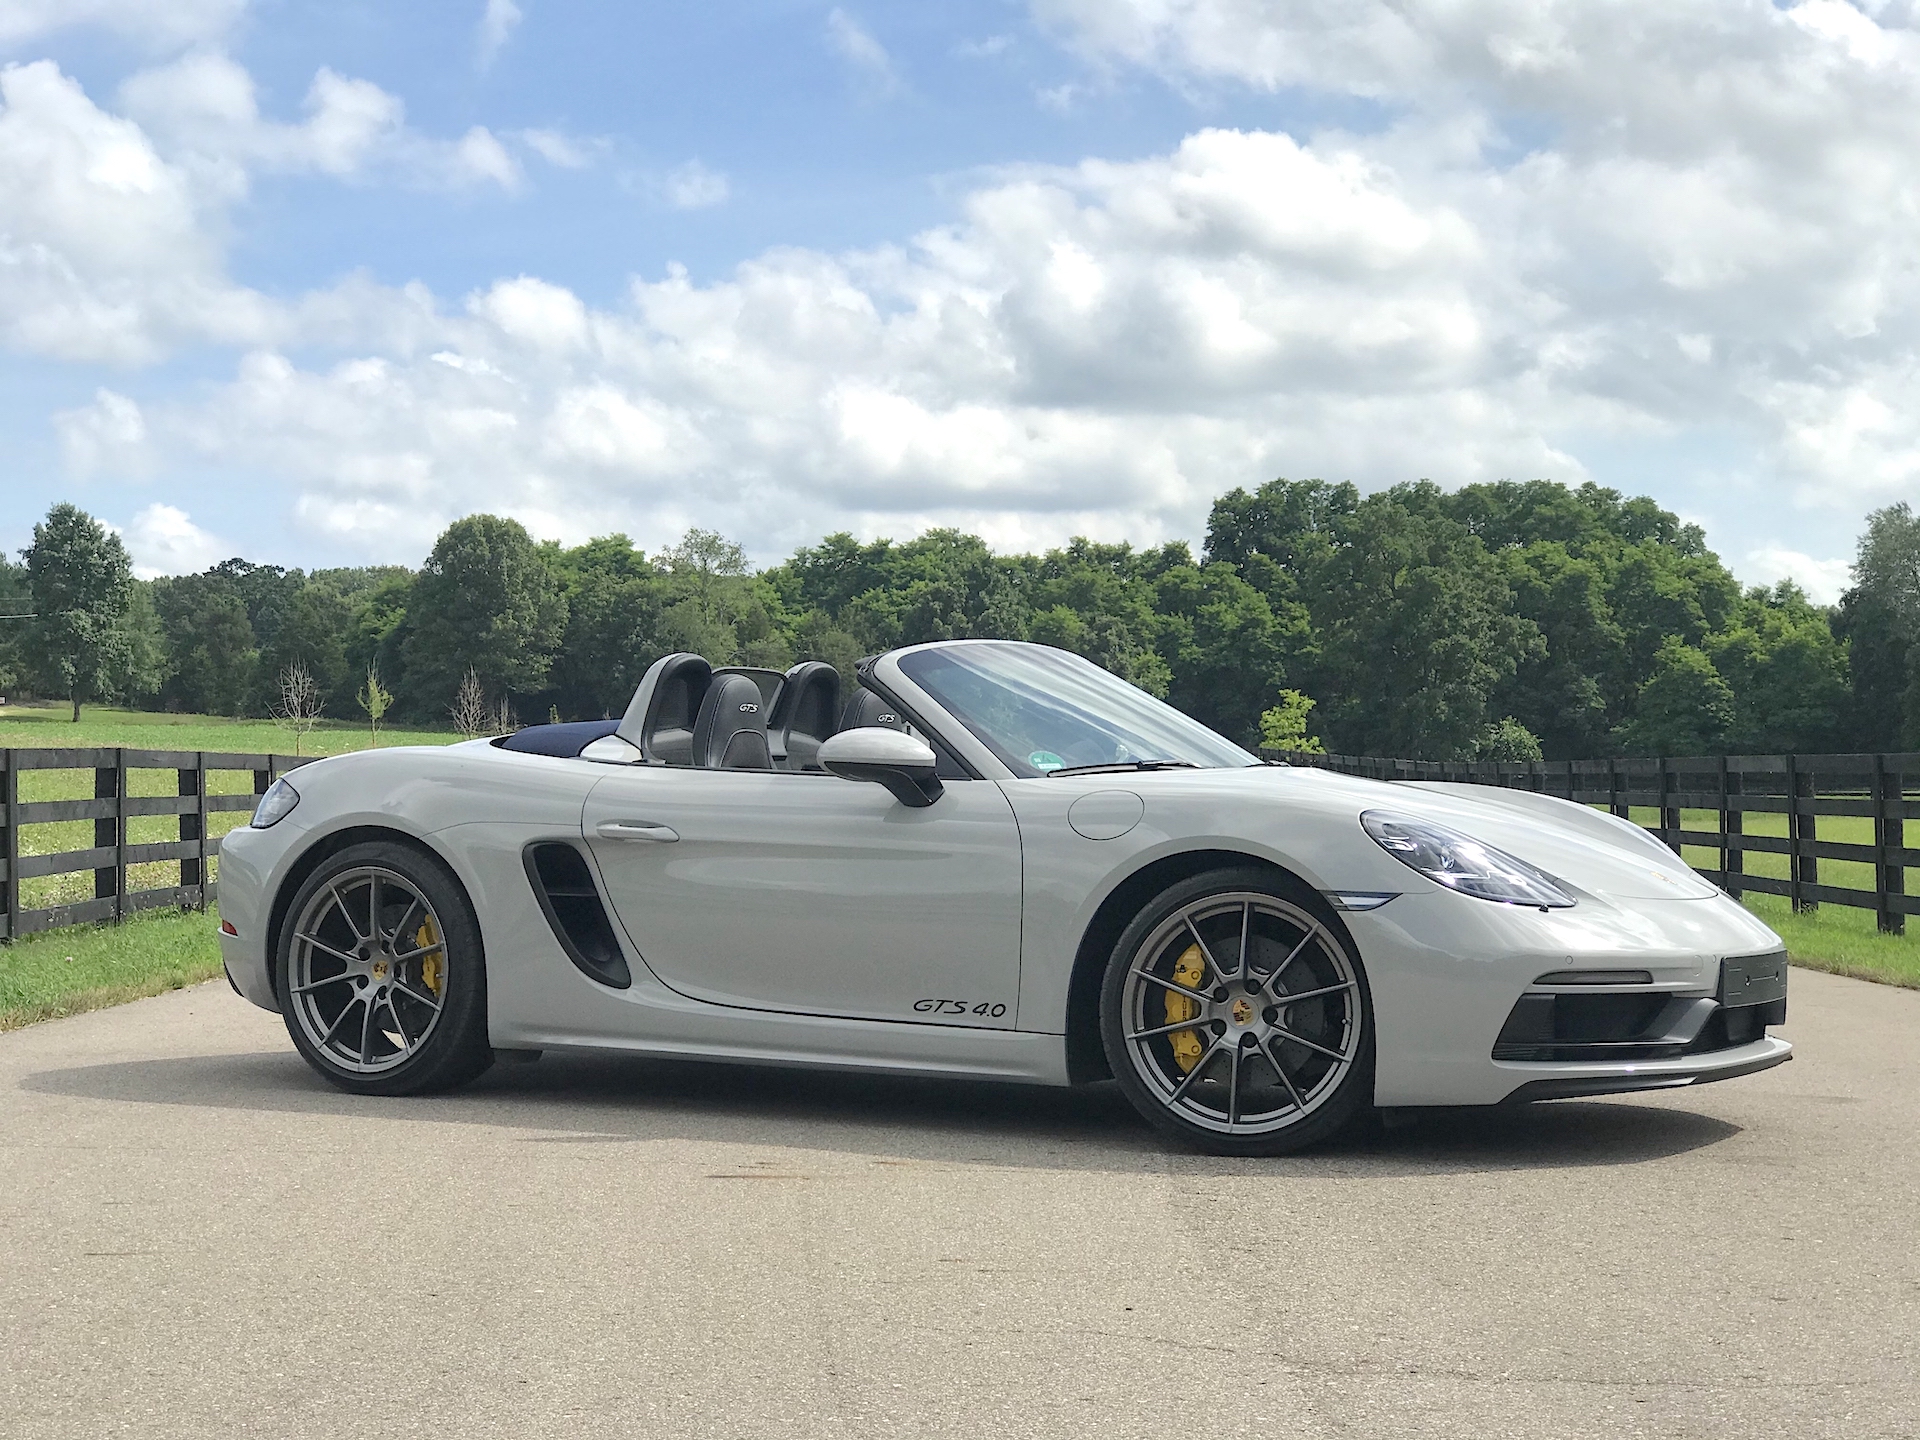 First drive review: 2020 Porsche 718 Boxster GTS 4.0 rocks to a familiar  tune